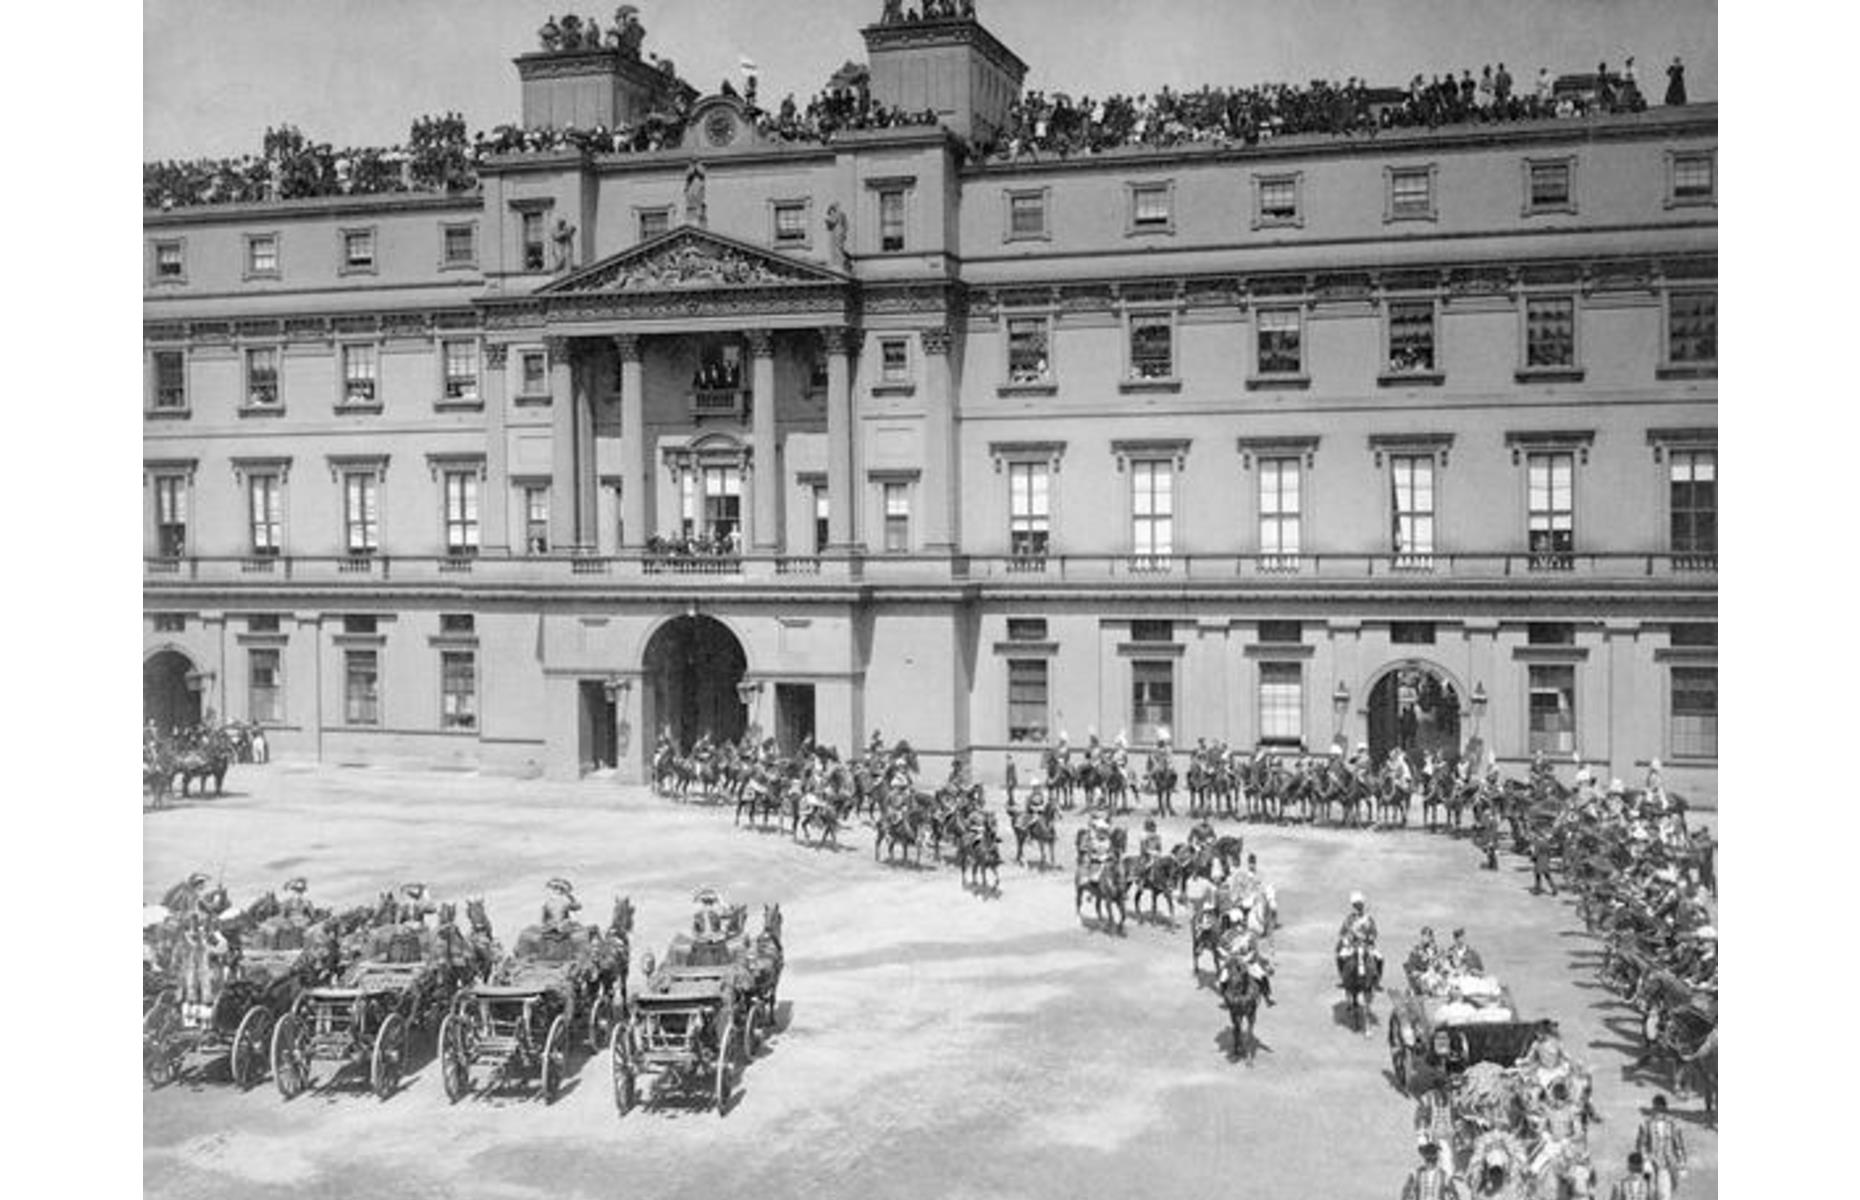 <p>Shown here during Queen Victoria’s Diamond Jubilee in 1897, Buckingham Palace is one of the UK’s most famous landmarks and has served as an official residence of the Royal Family since 1837, remaining the administrative headquarters of the Queen today. The palace, which has 775 rooms and is set among 39 acres of grounds, has held public tours every summer since 1993. Another popular event with visitors is the daily Changing of the Guards ceremony outside the Palace gates, although it is <a href="https://changing-guard.com/dates-buckingham-palace.html">currently suspended</a> due to COVID-19.</p>